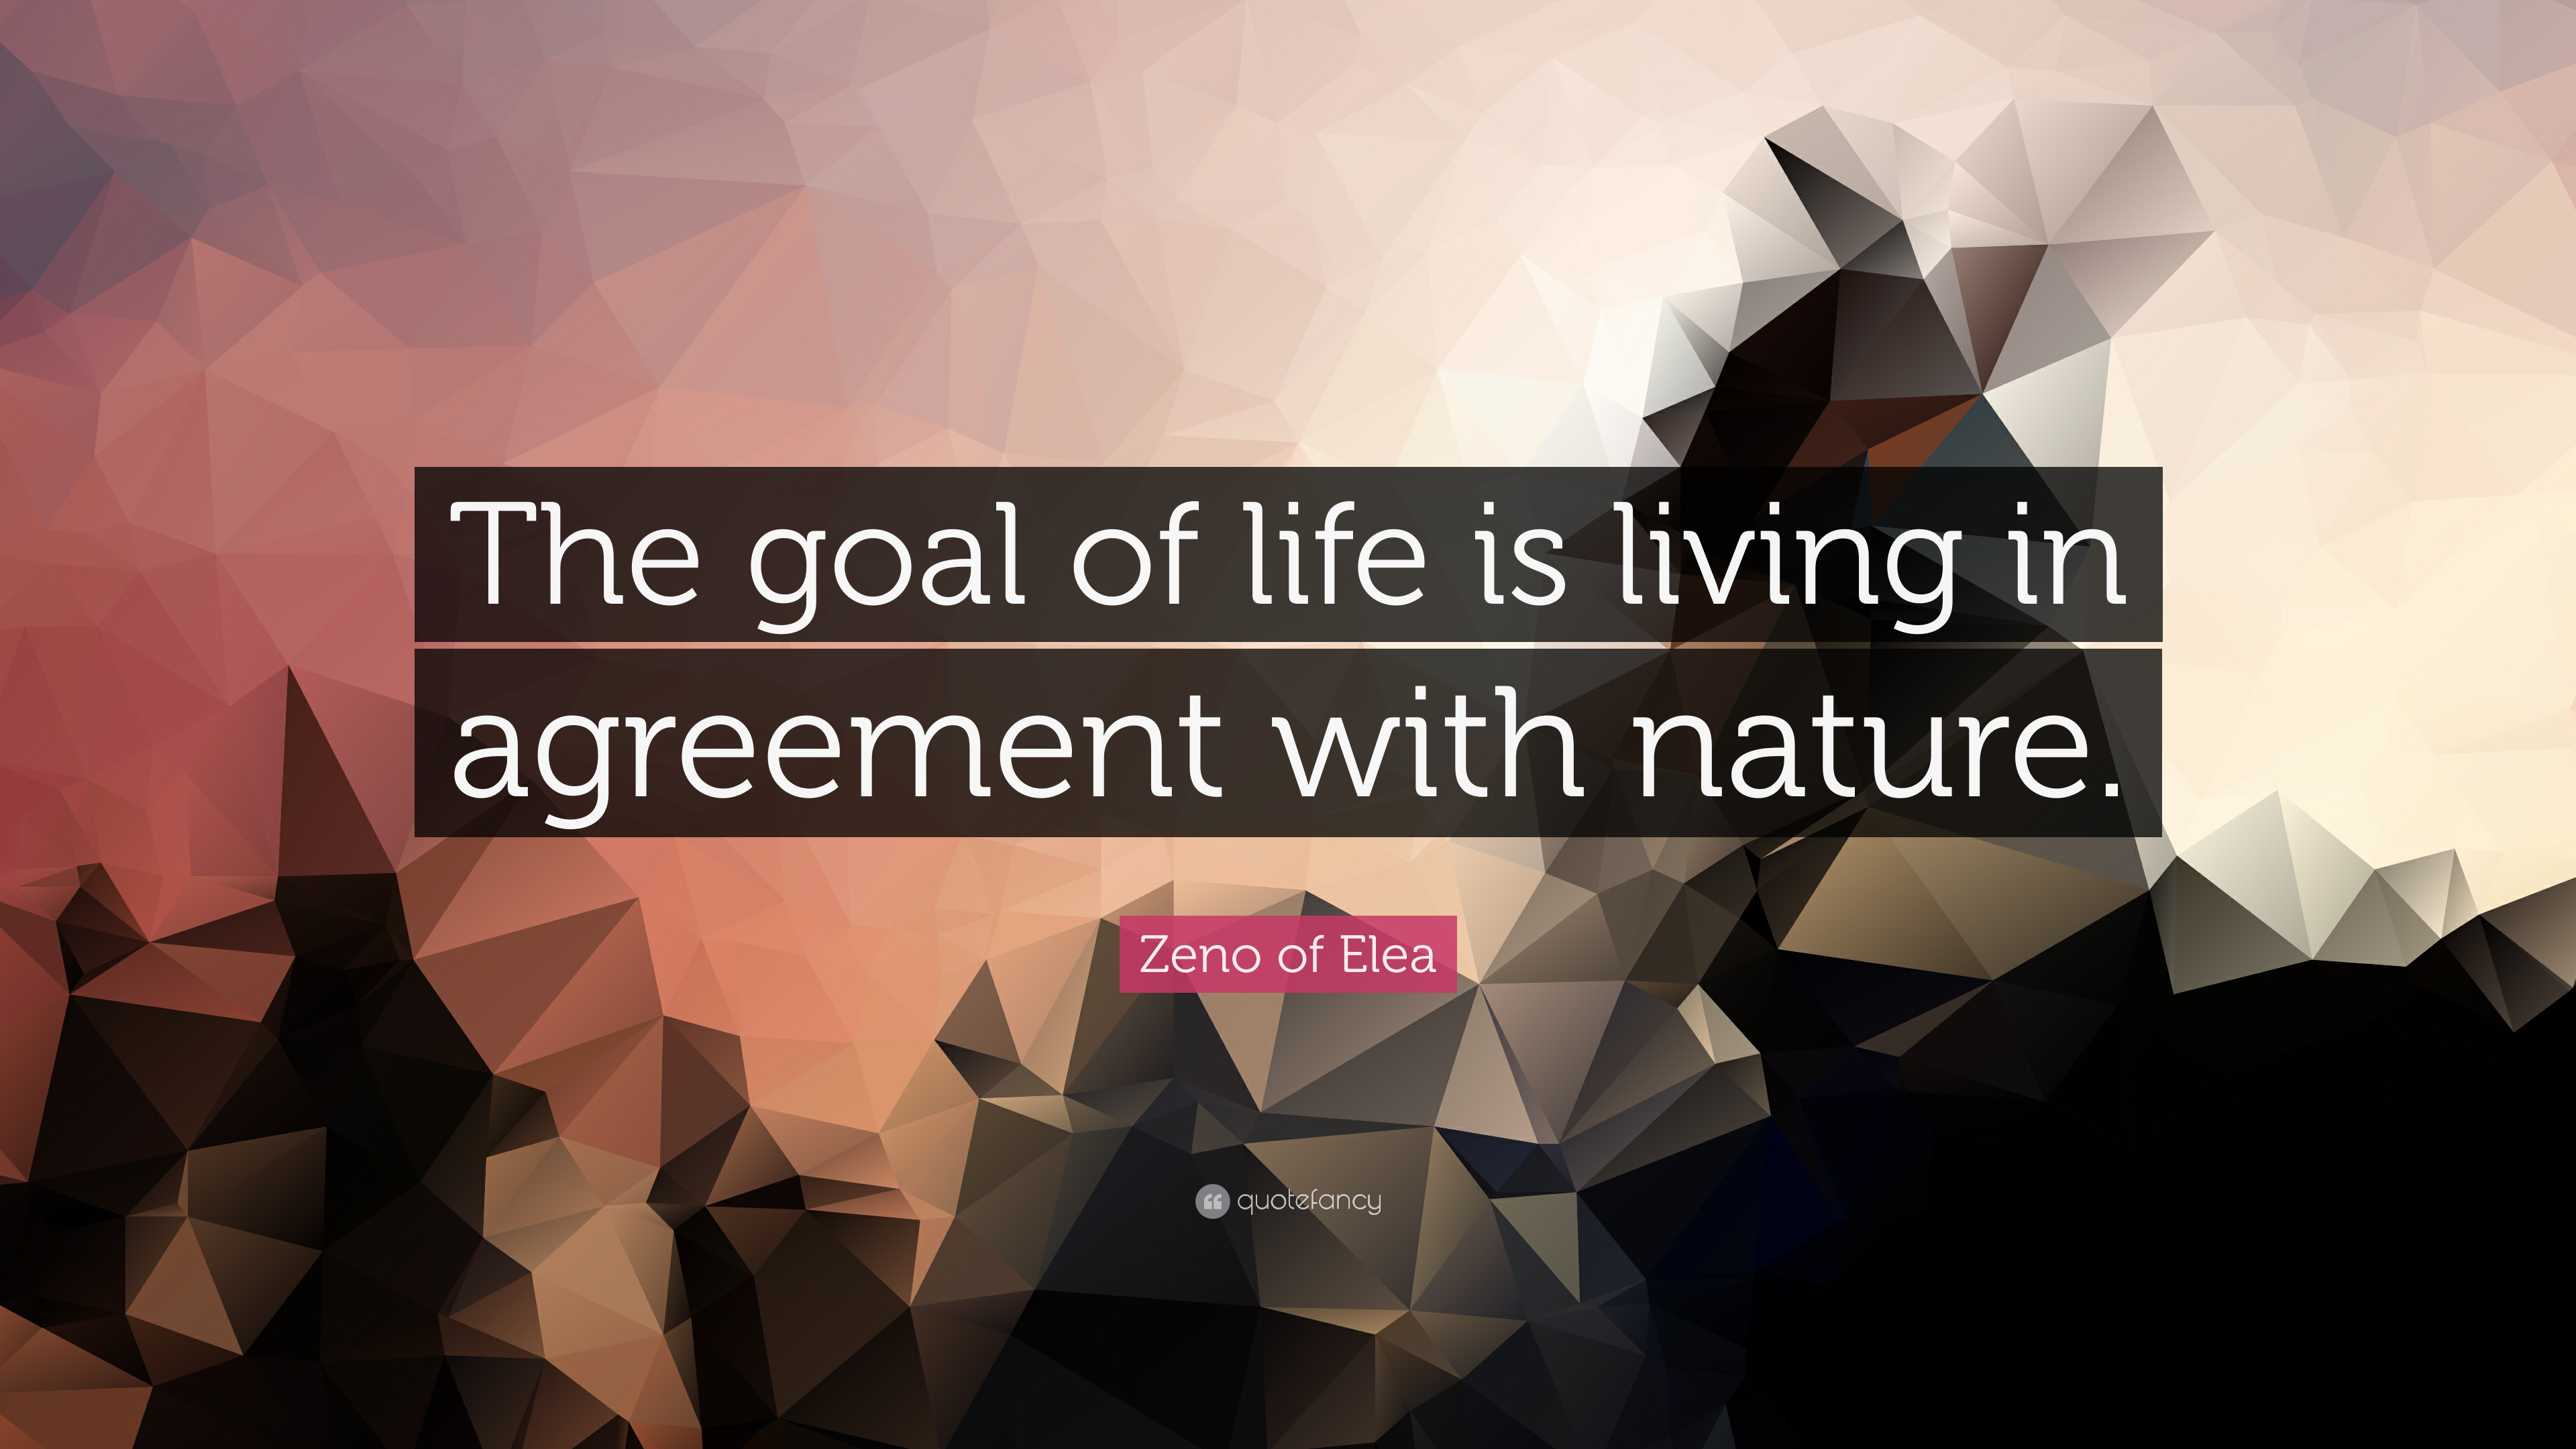 Zeno of Elea Quote: “The goal of life is living in agreement